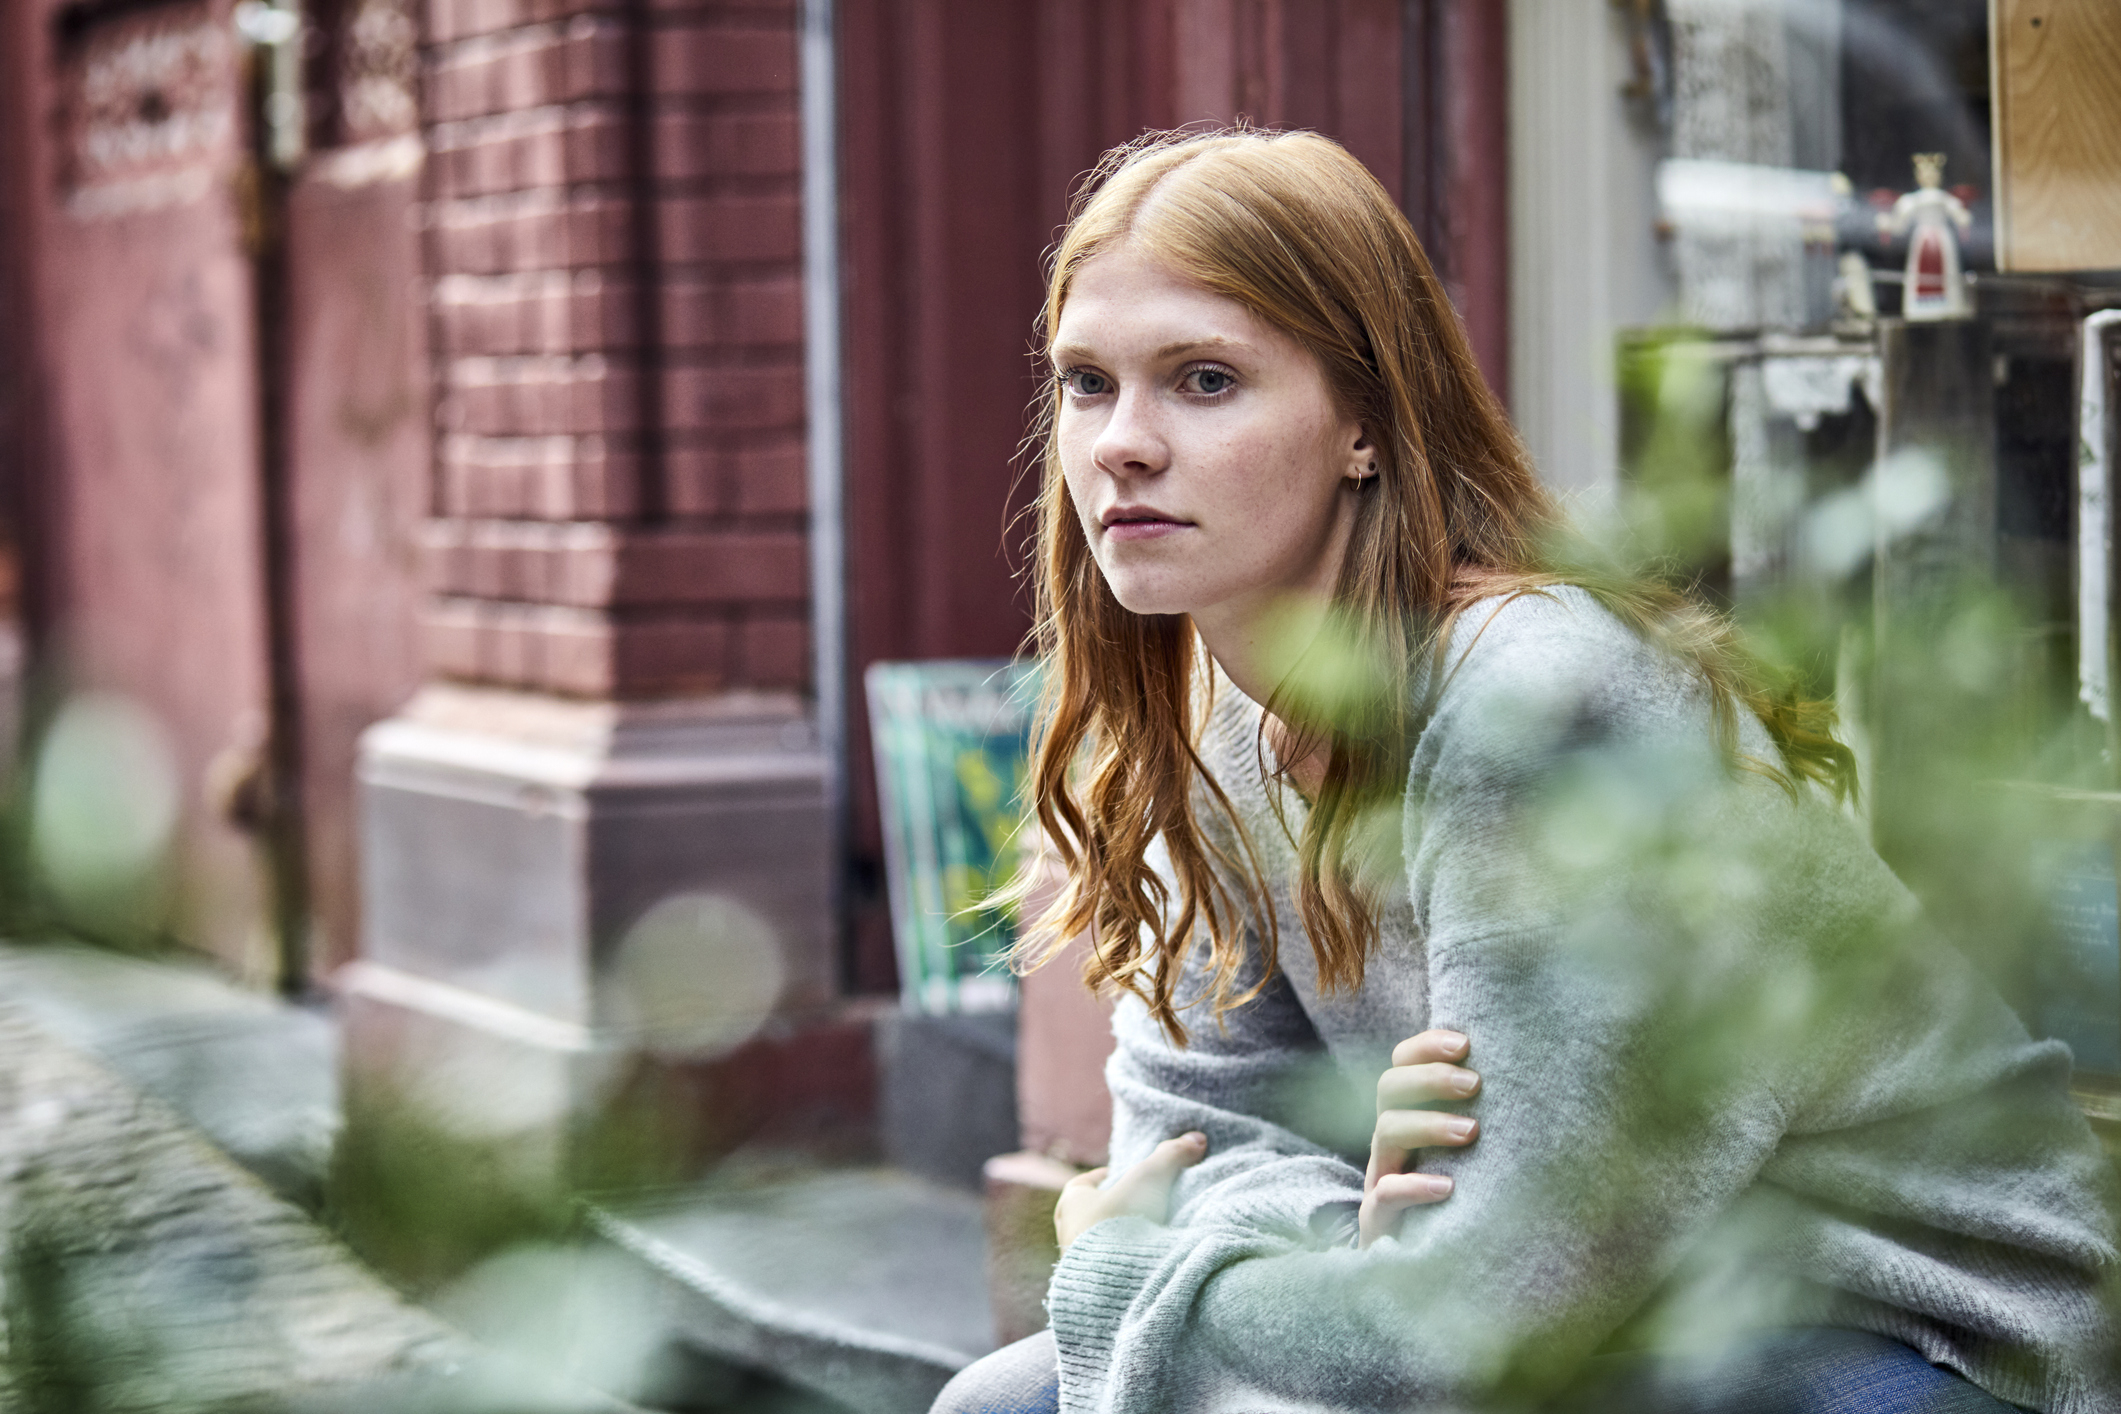 A woman with long red hair and a contemplative expression sits outside on a bench, wearing a casual sweater